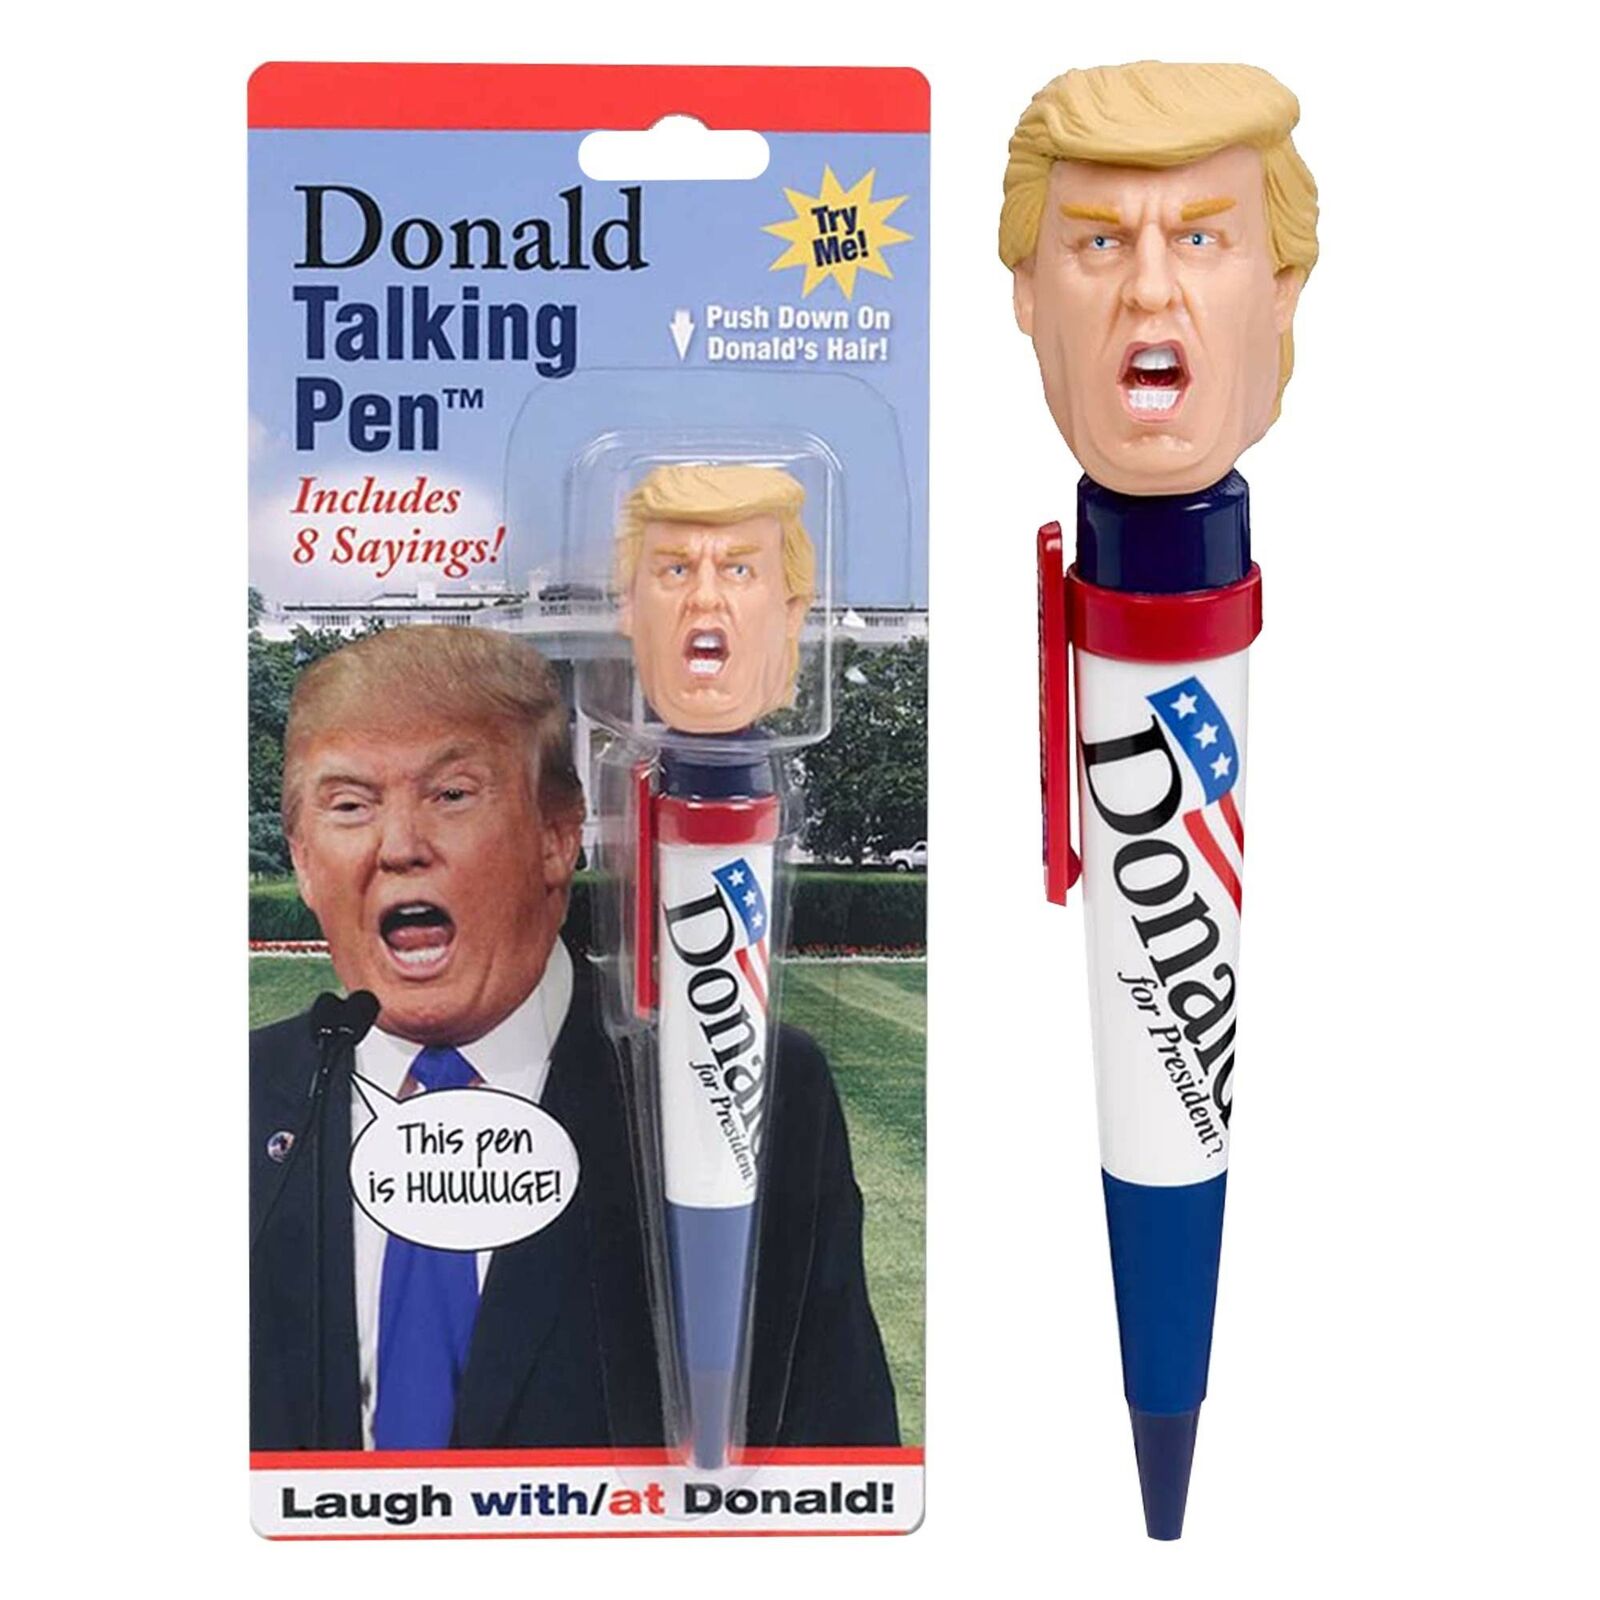 Donald Talking Pen - 8 Different Sayings - Trump's REAL VOICE - Click & Listen